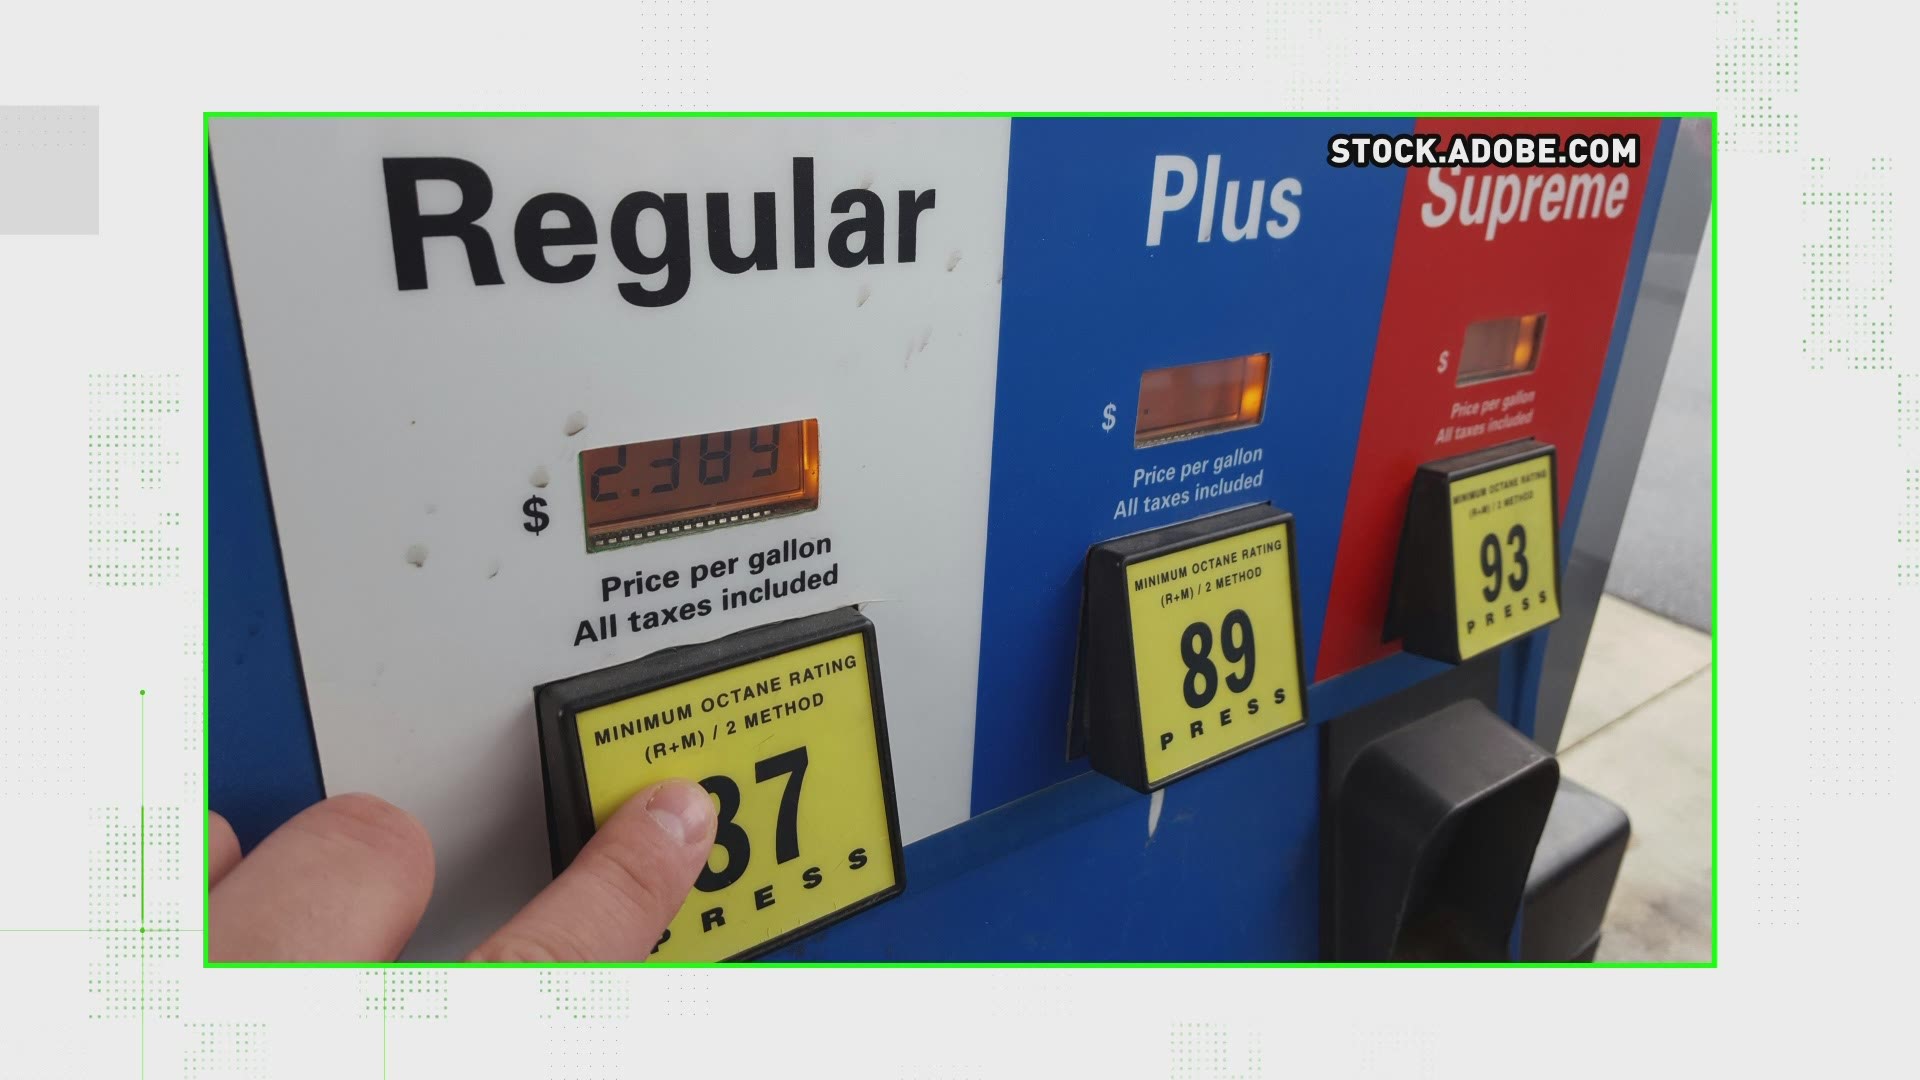 The Colonial Pipeline outage forced drivers to take what they could find. Fuel experts agree you can fill up with a higher-grade gas but not lower.